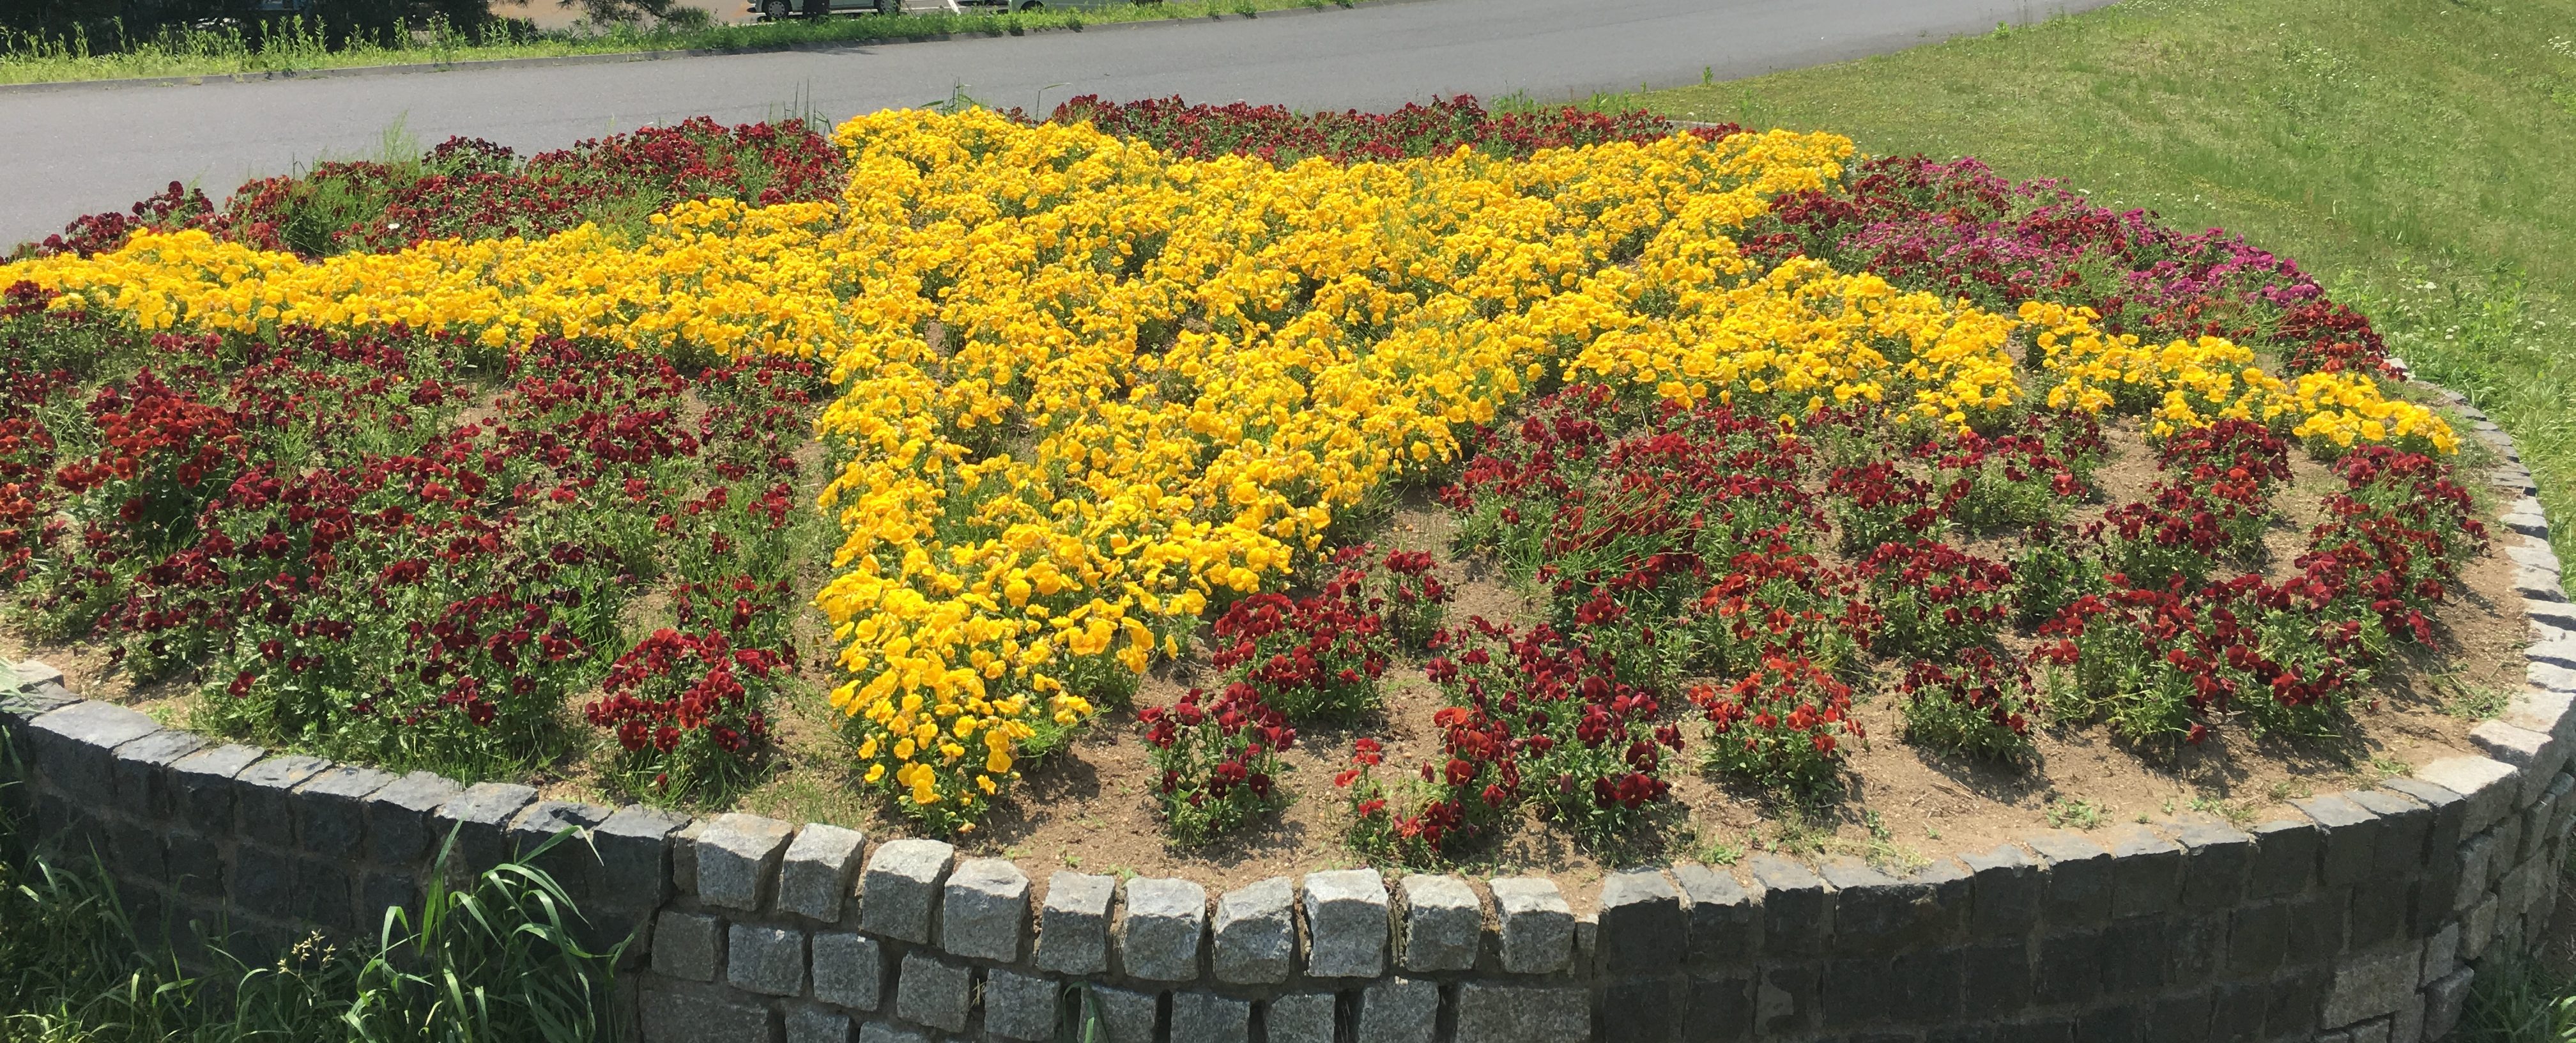 a flower bed with yellow and red flowers